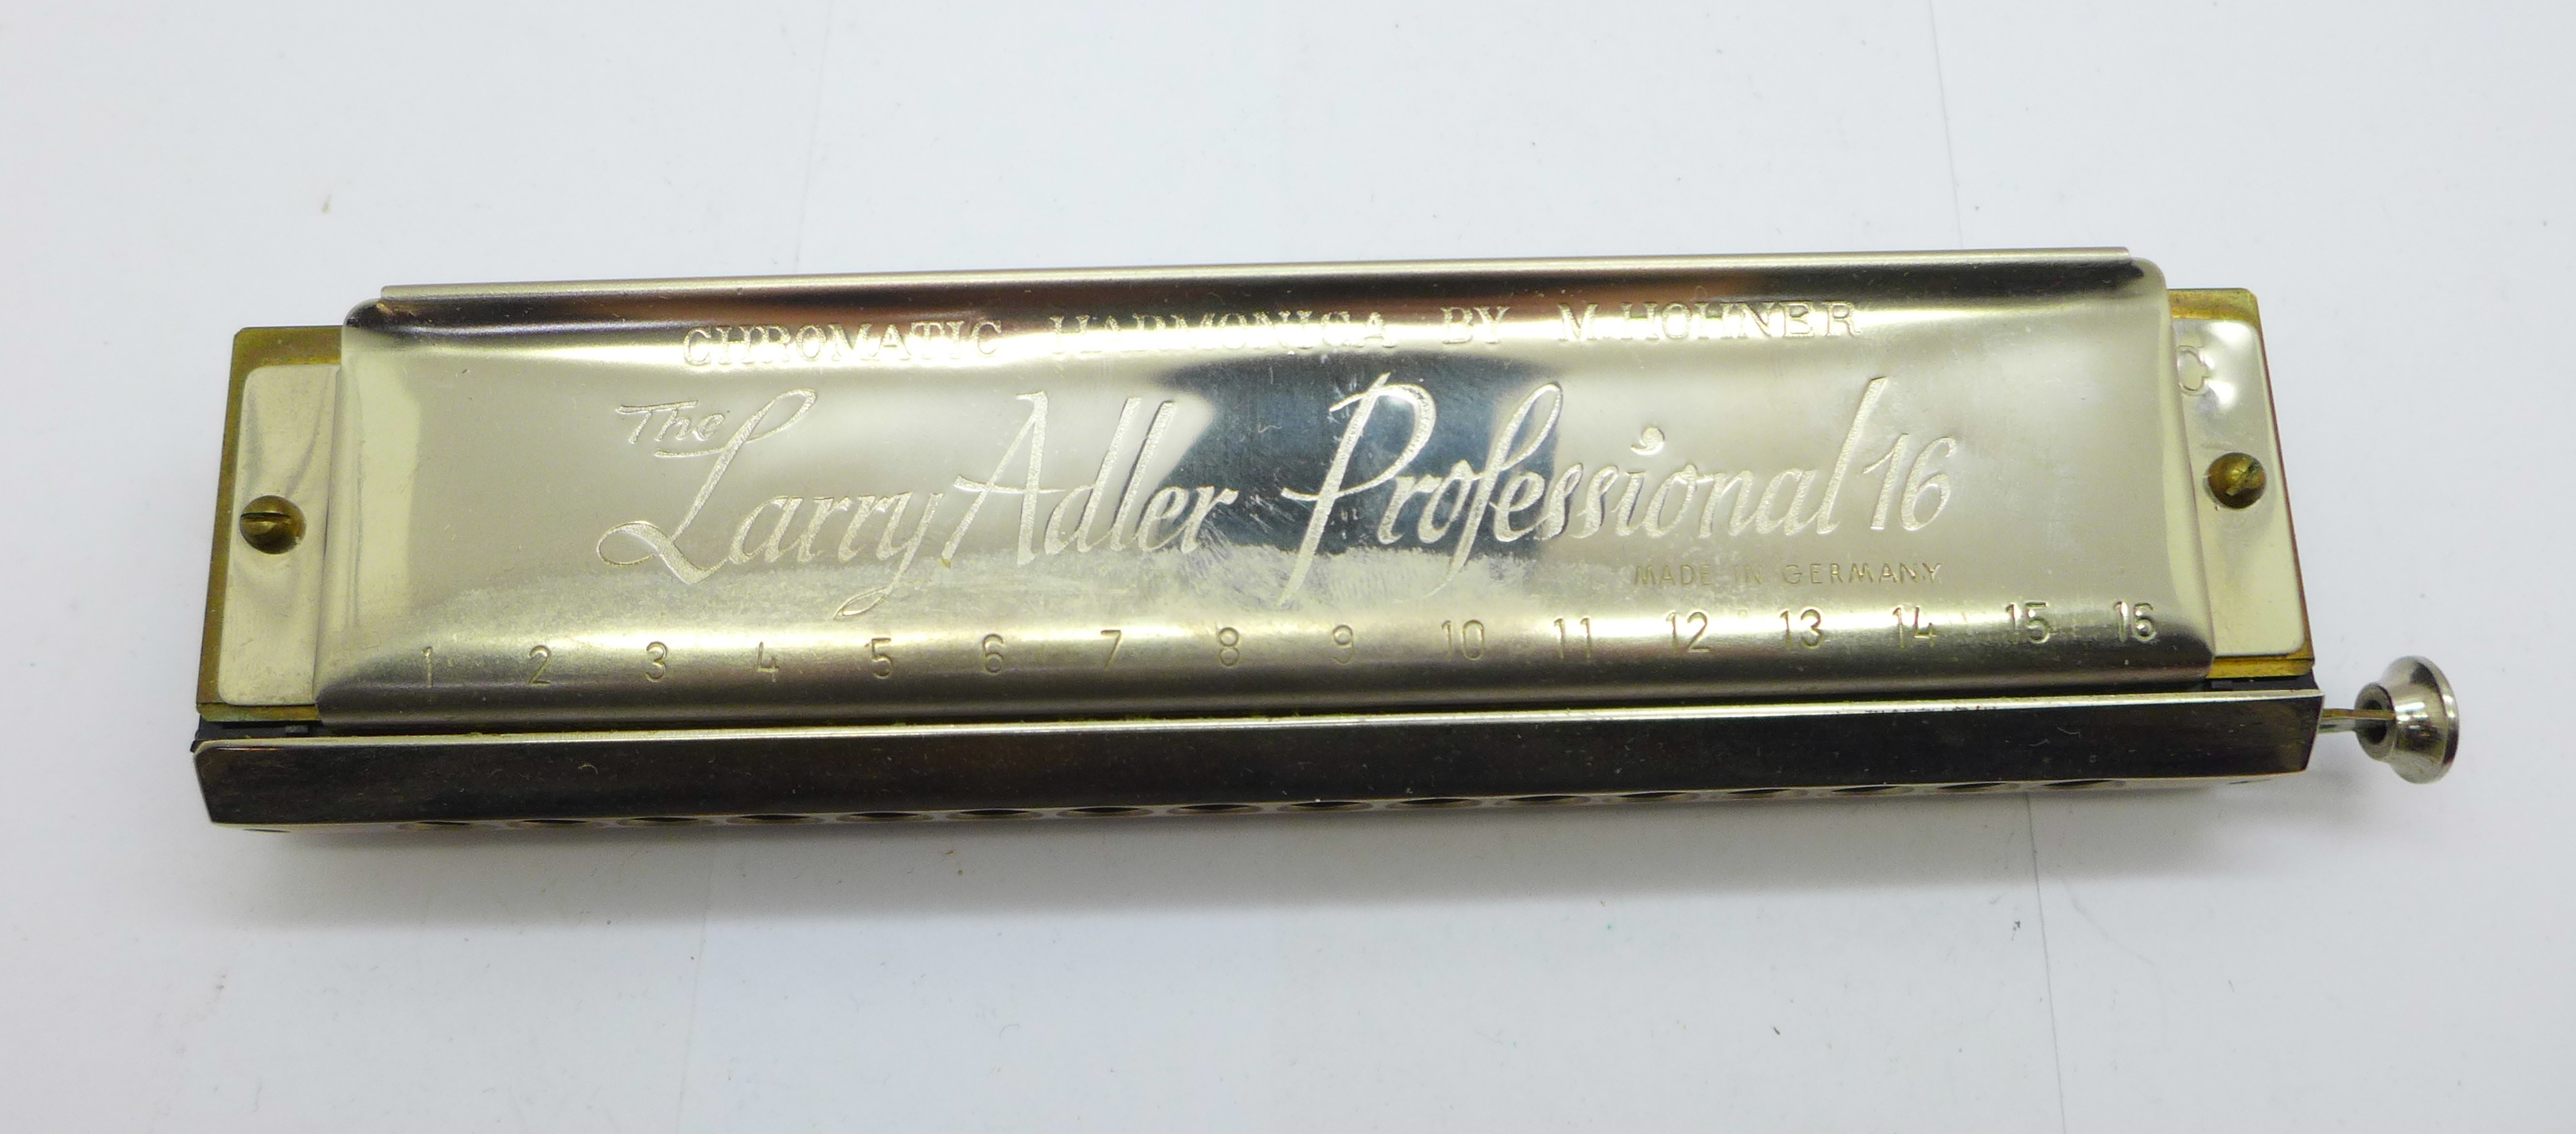 Two Hohner The Larry Adler Professional 16 chromatic harmonicas, boxed - Image 4 of 6